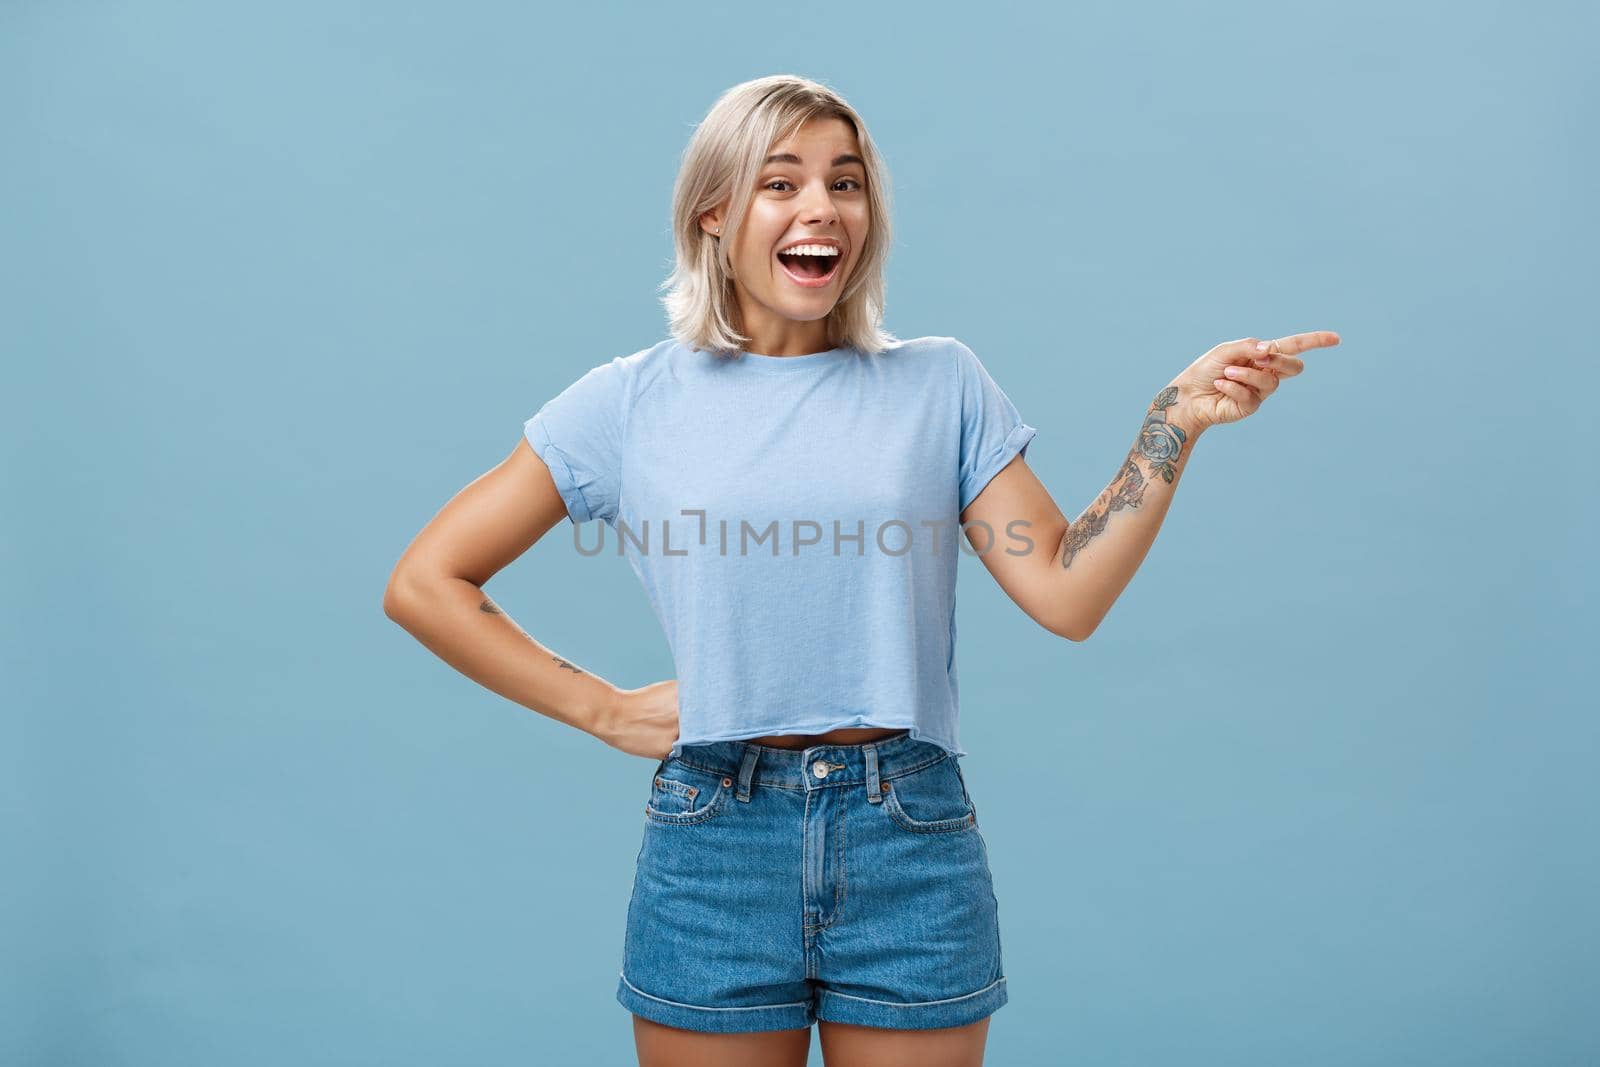 Studio shot of impressed and surprised entertained blonde female in summer outfit holding hand on waist pointing right and smiling joyfully being amazed and amused over blue background. Emotions and advertisement concept